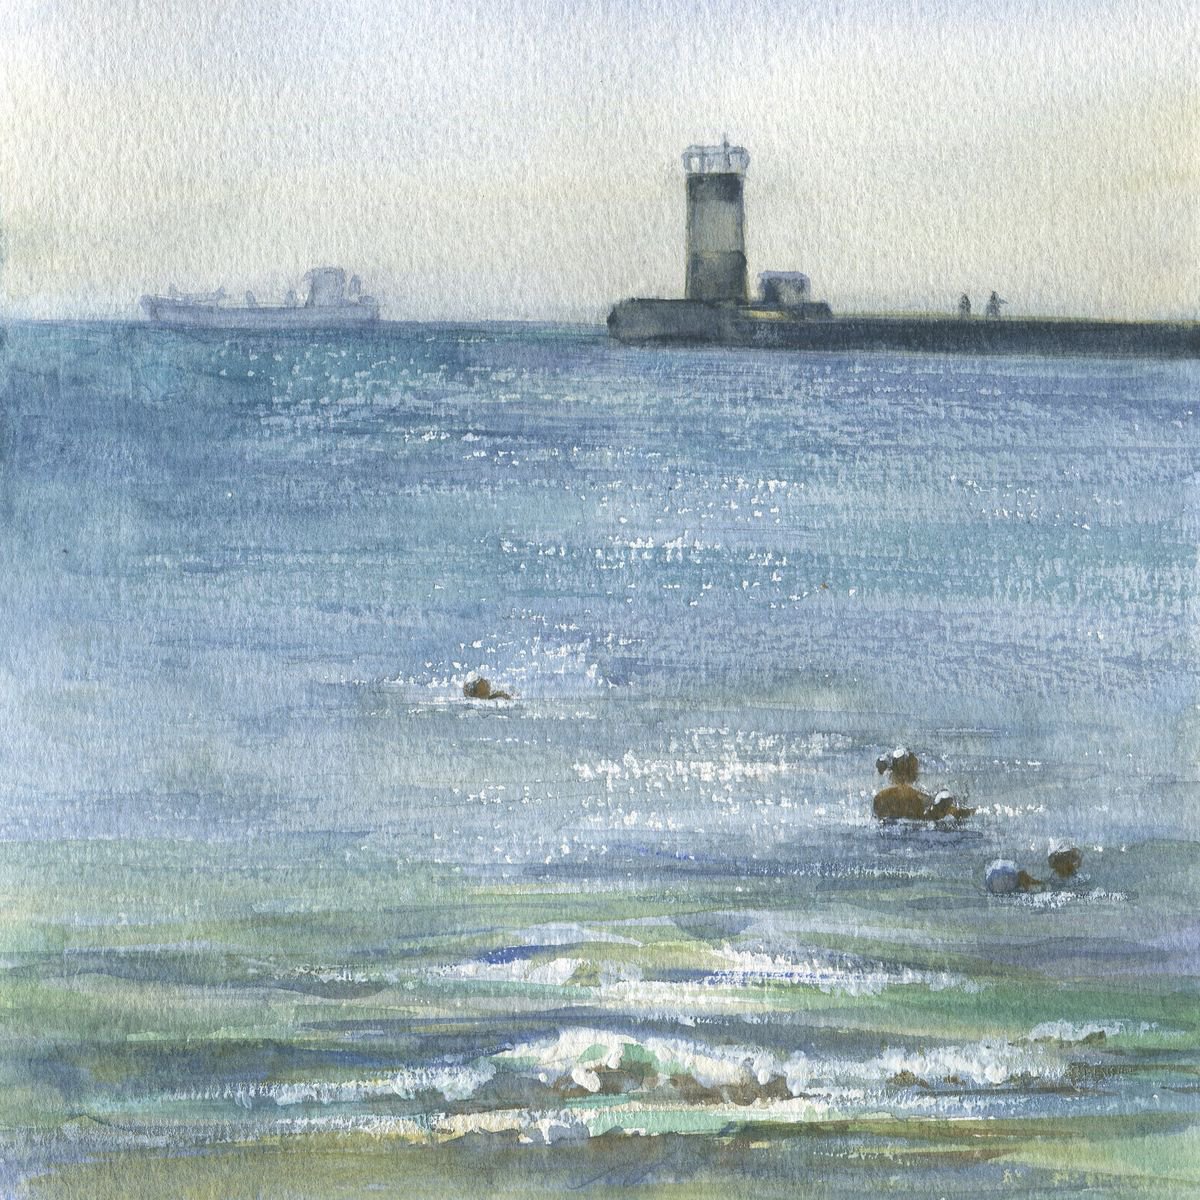 Marine sketch. At midday near a lighthouse / Small watercolor seascape by Olha Malko